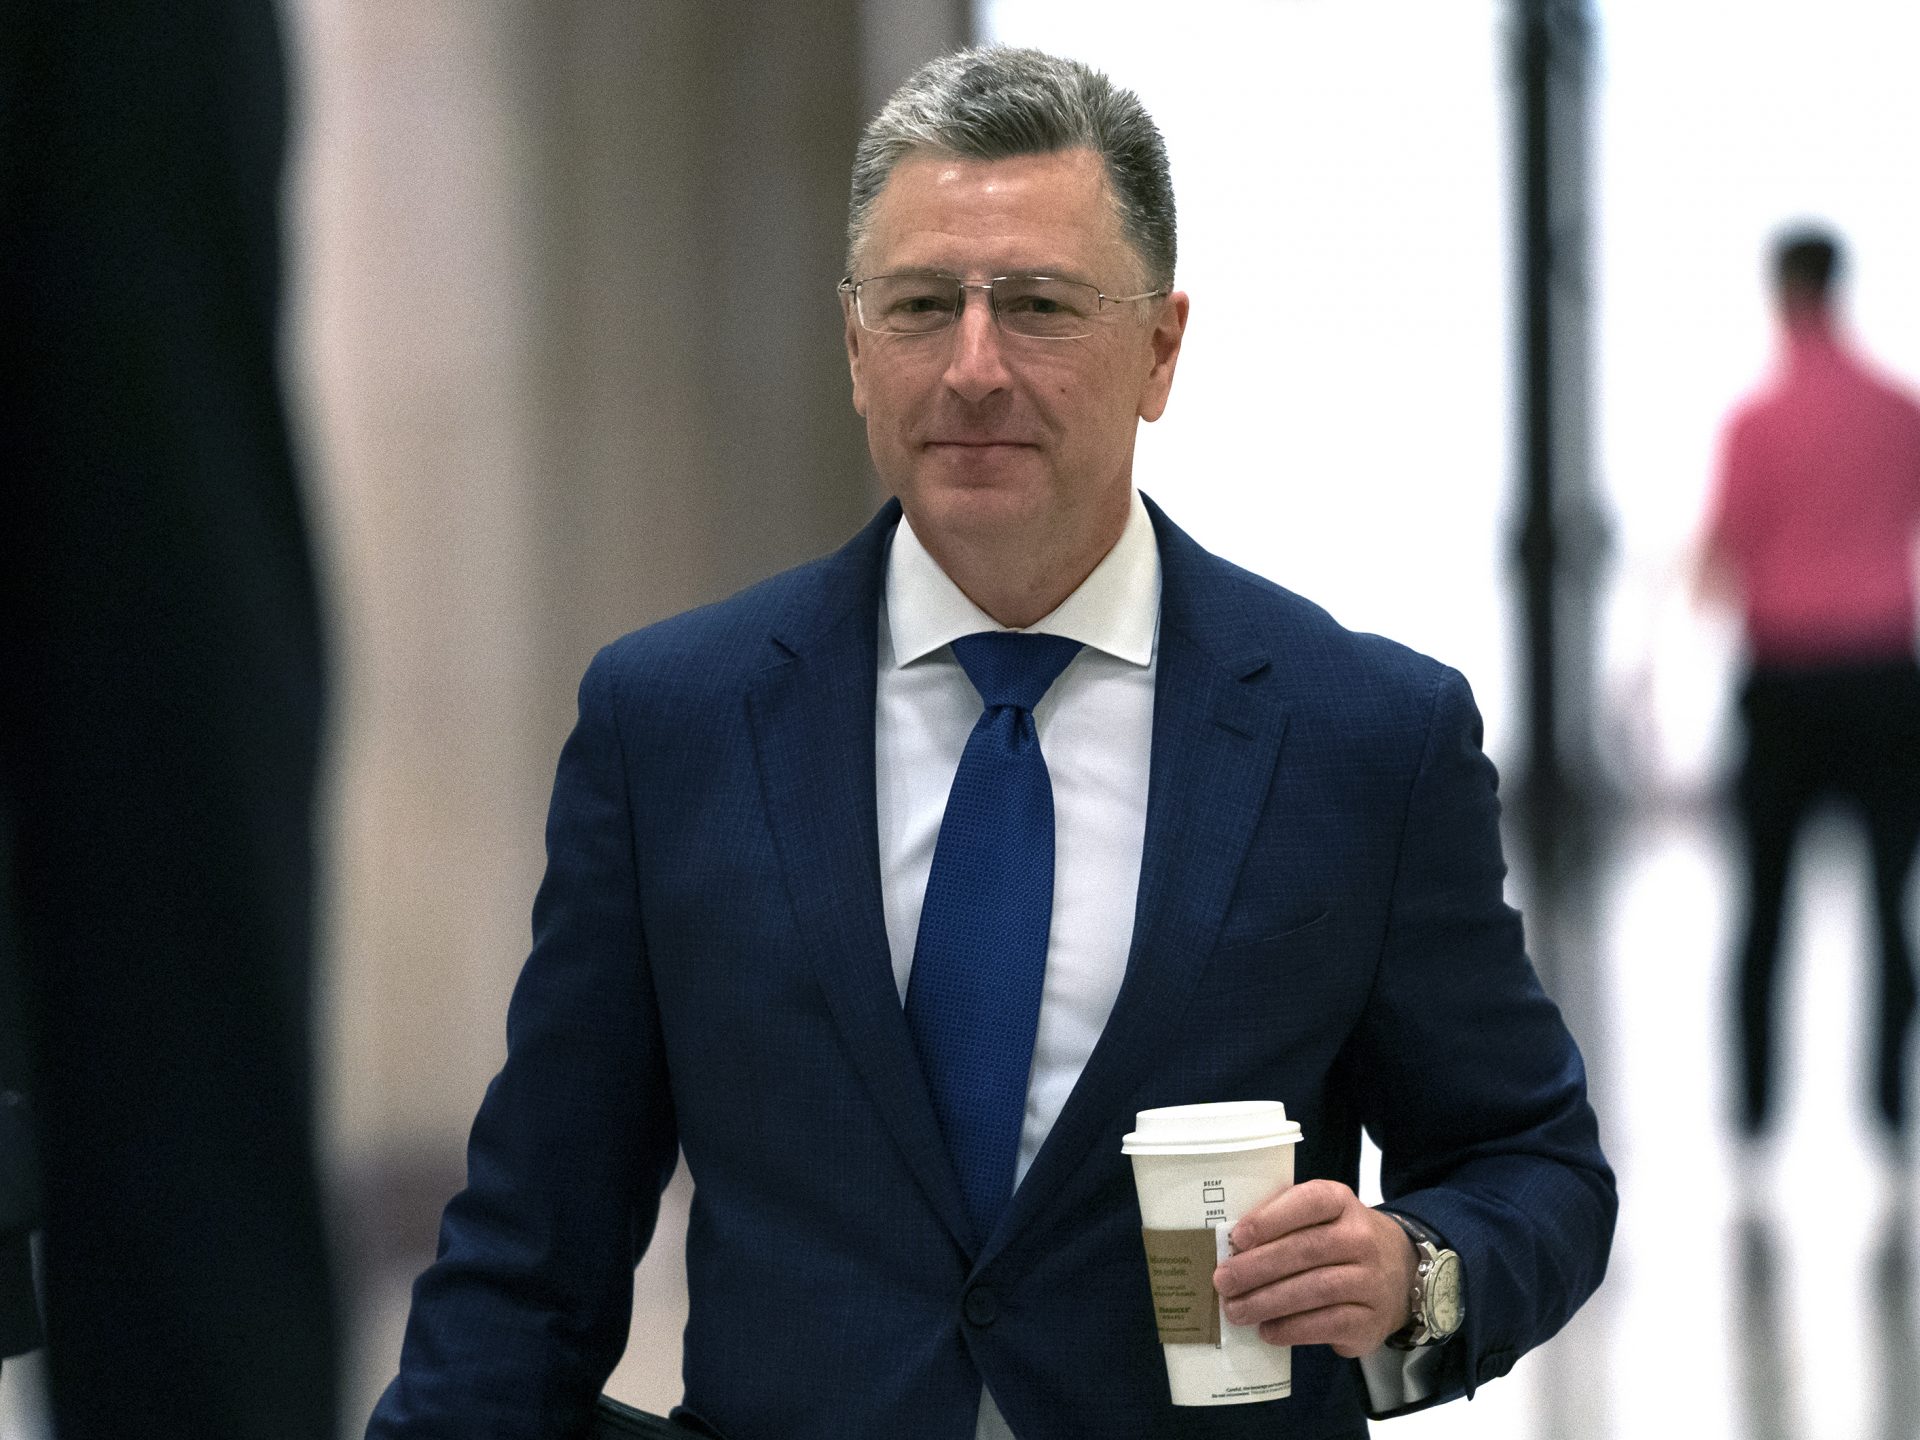 Kurt Volker, former U.S. special envoy to Ukraine, arrives for a closed-door interview with House investigators on Thursday. House Democrats are proceeding with the impeachment inquiry of President Trump.